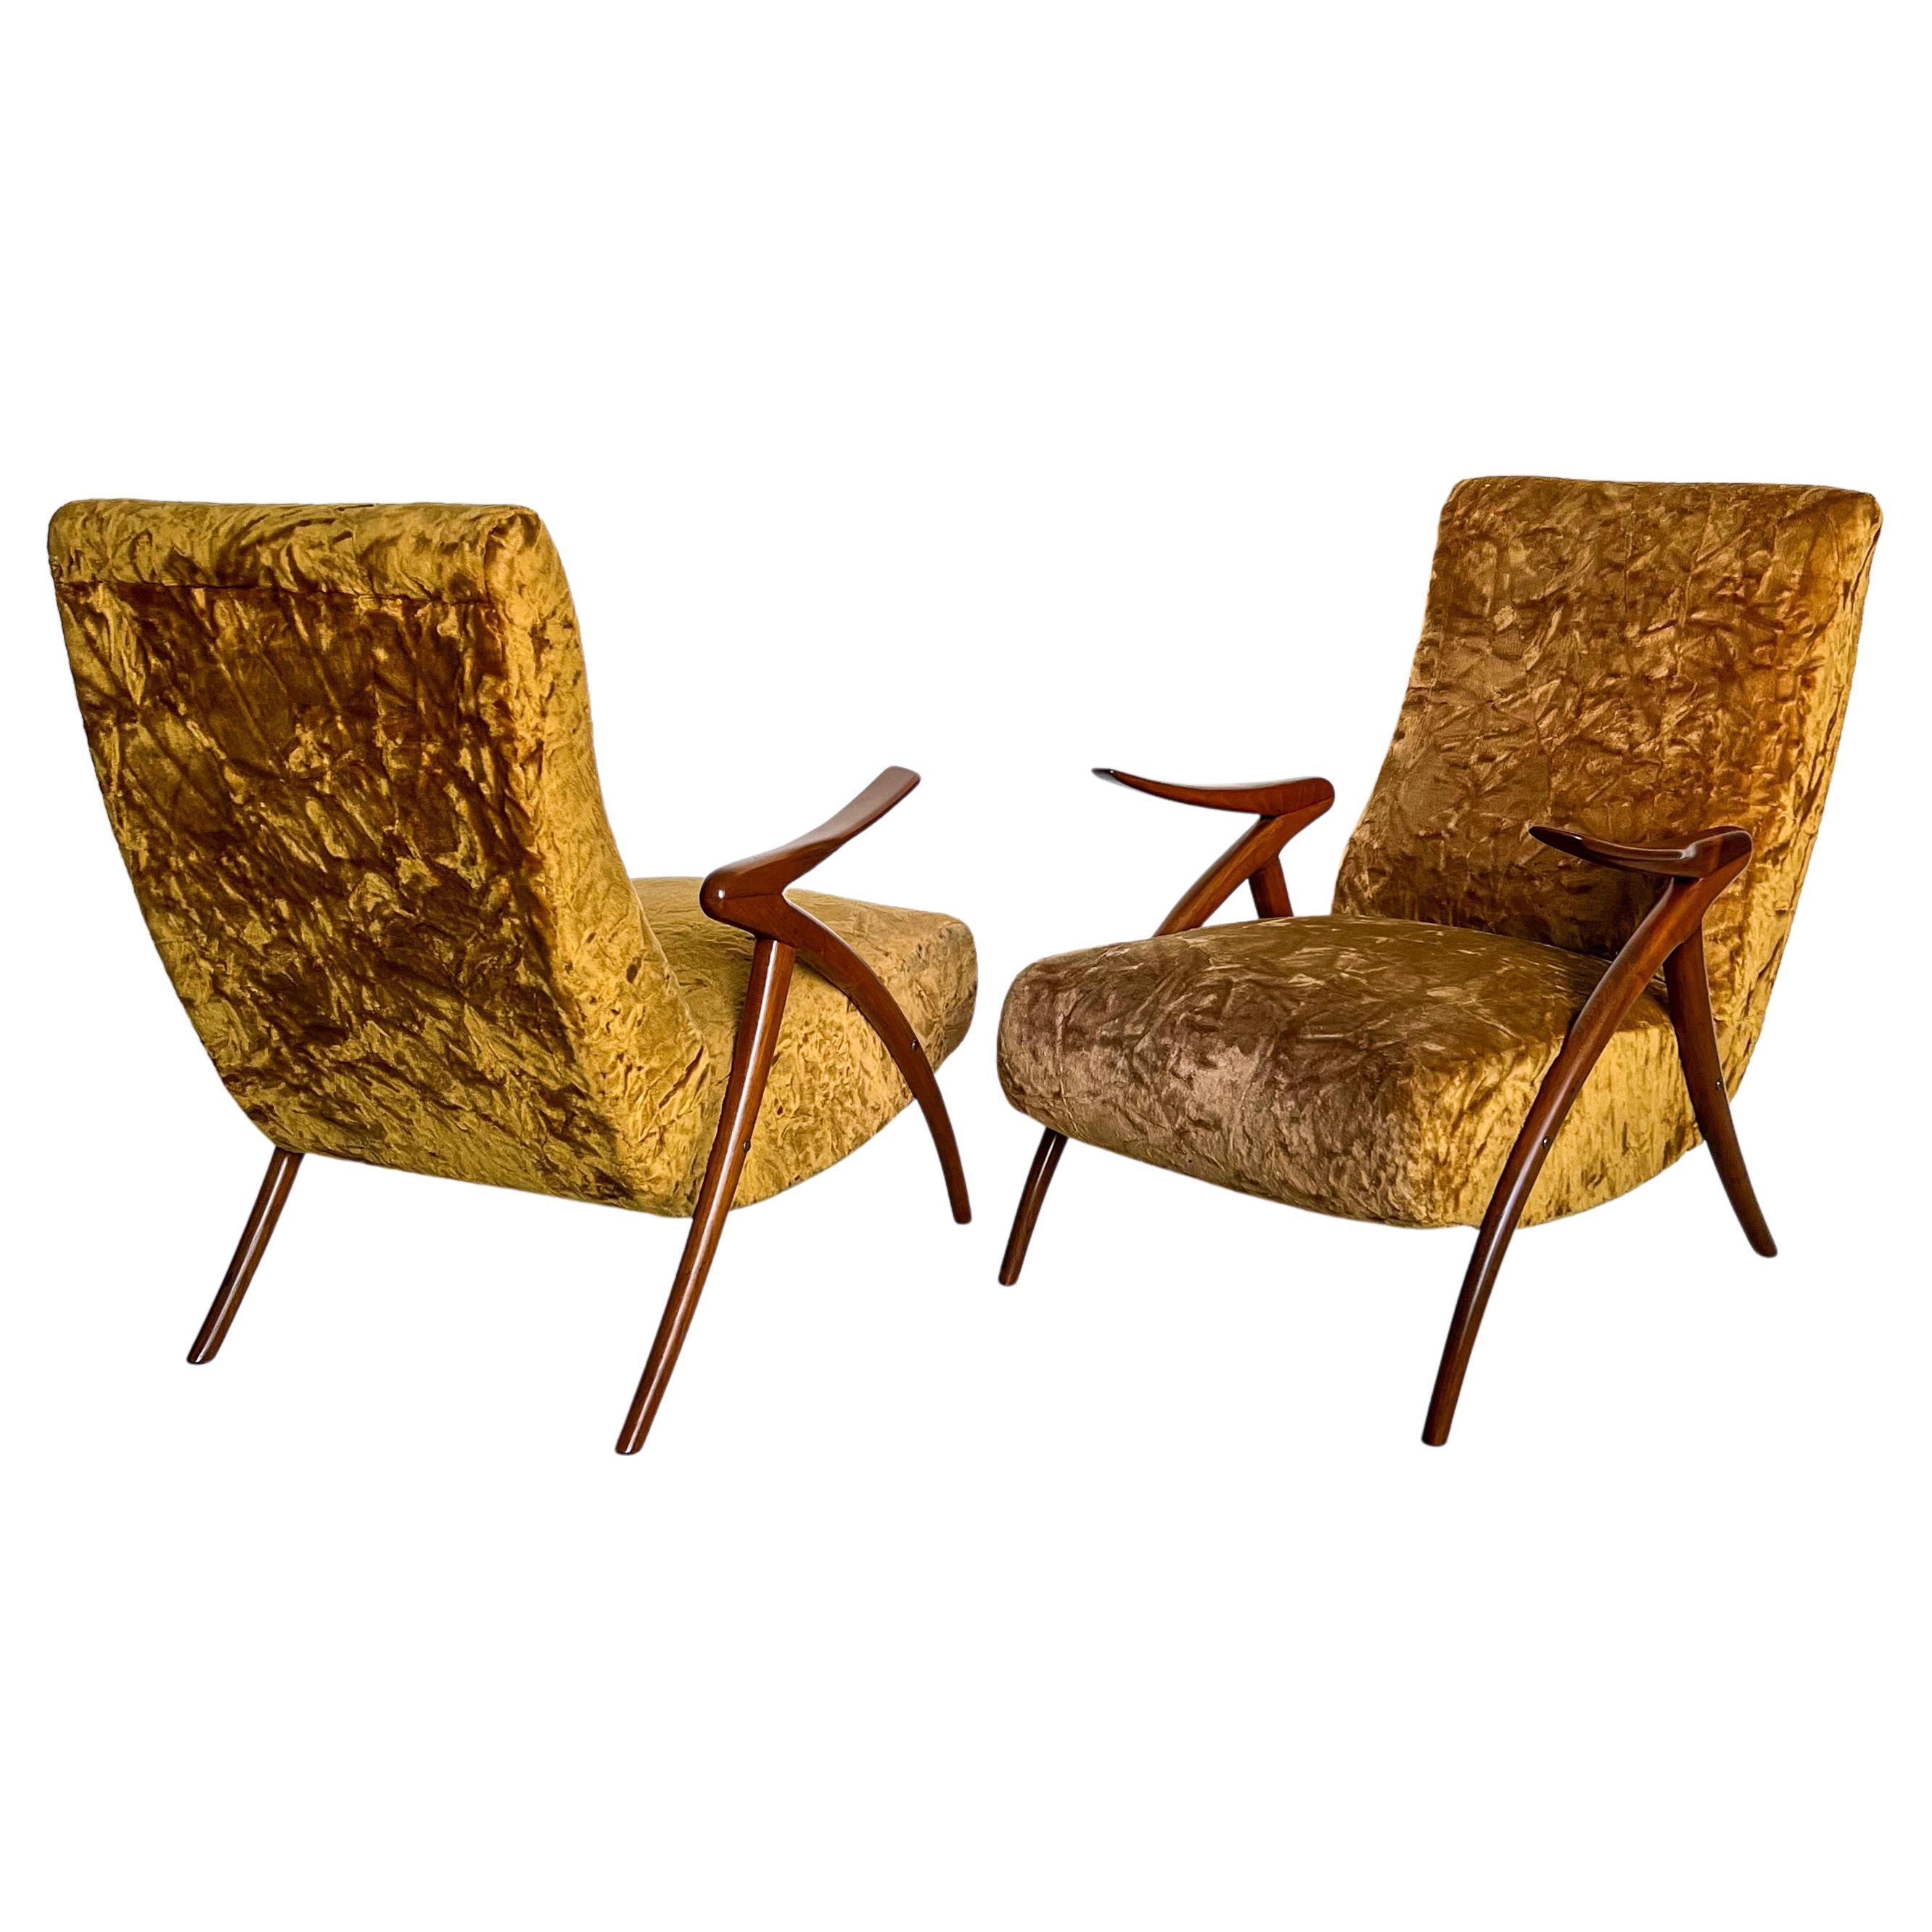 Pair of Vintage 1950s Italian Armchairs with Wood Legs and Yellow Fur Upholstery For Sale